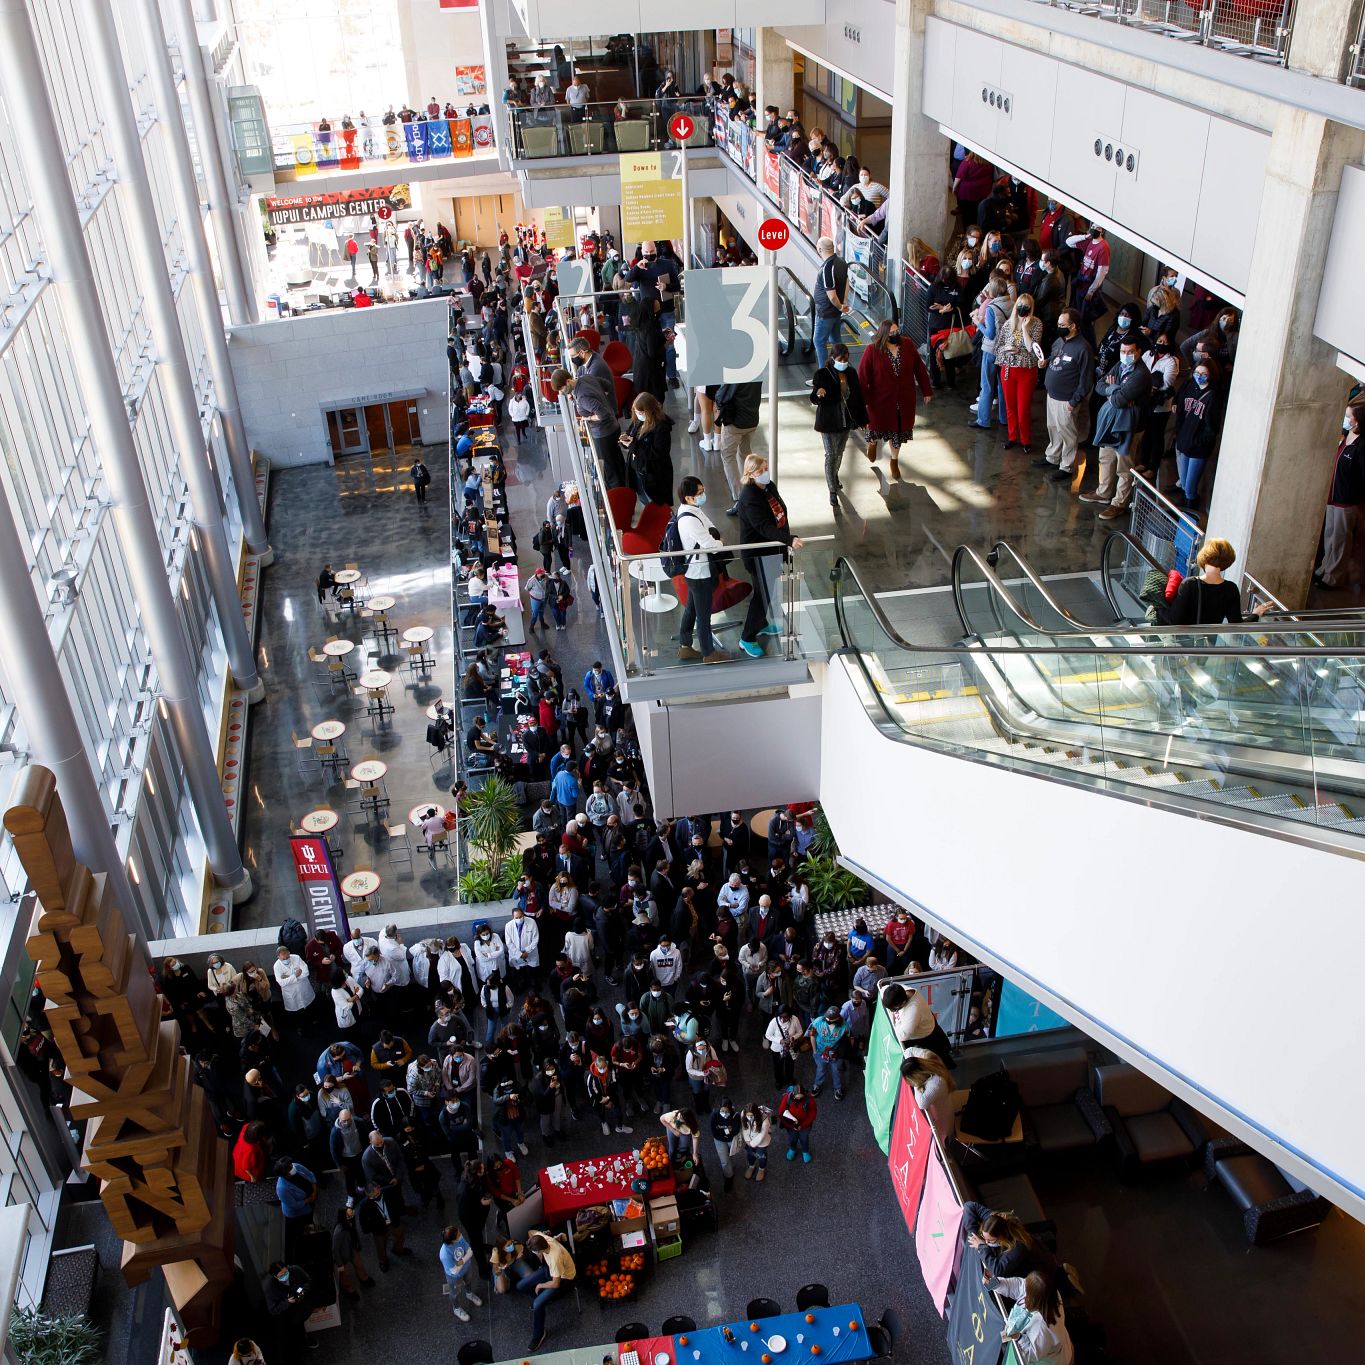 An overhead view of students filingl the Campus Center